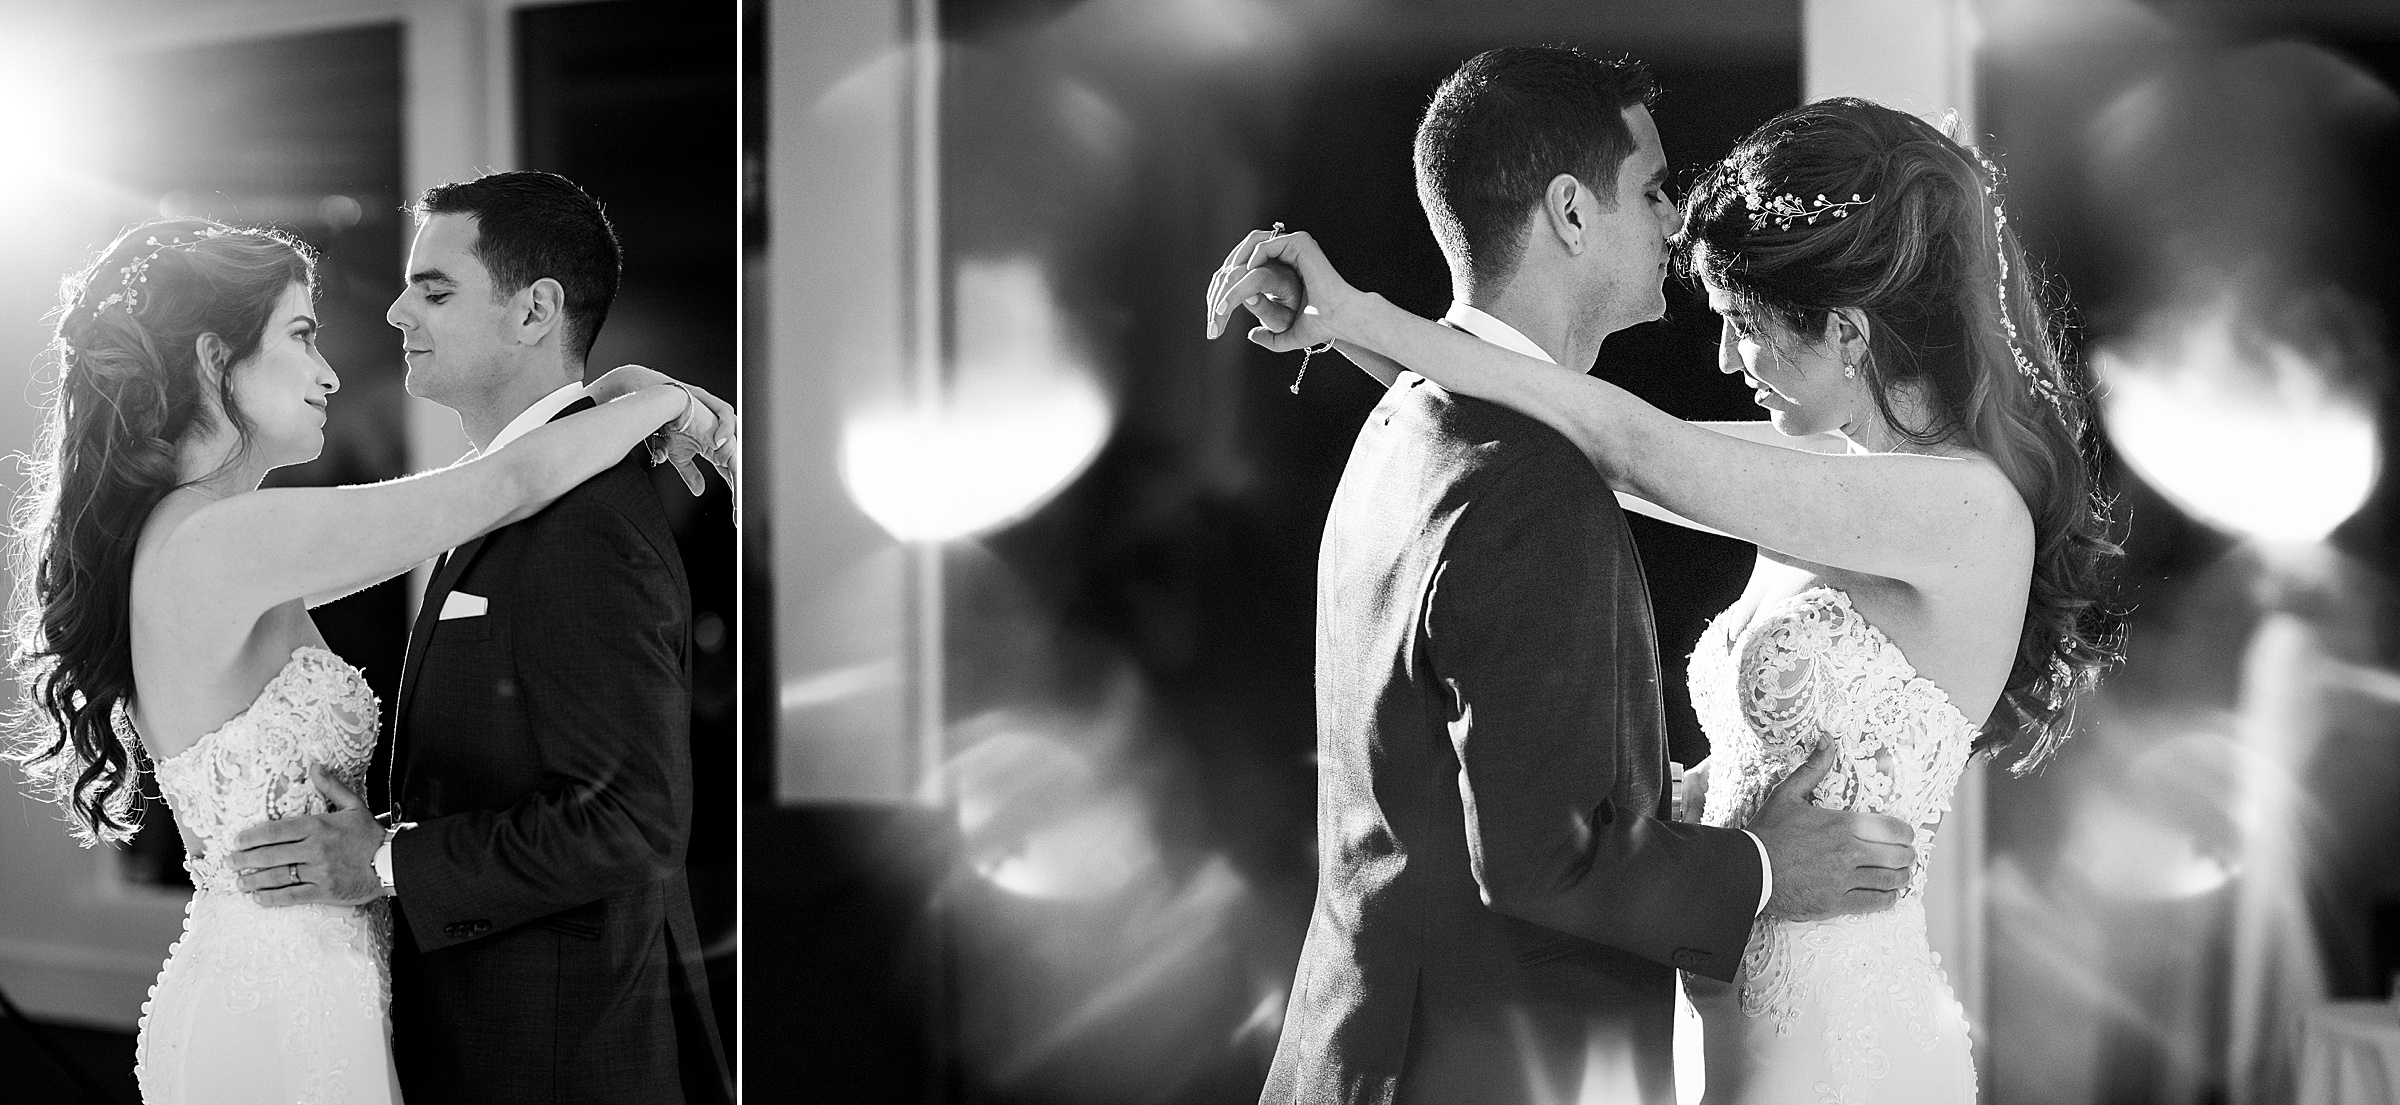 Black and white photo of bride and groom's first dance by Detroit Wedding Photographer Michele Maloney